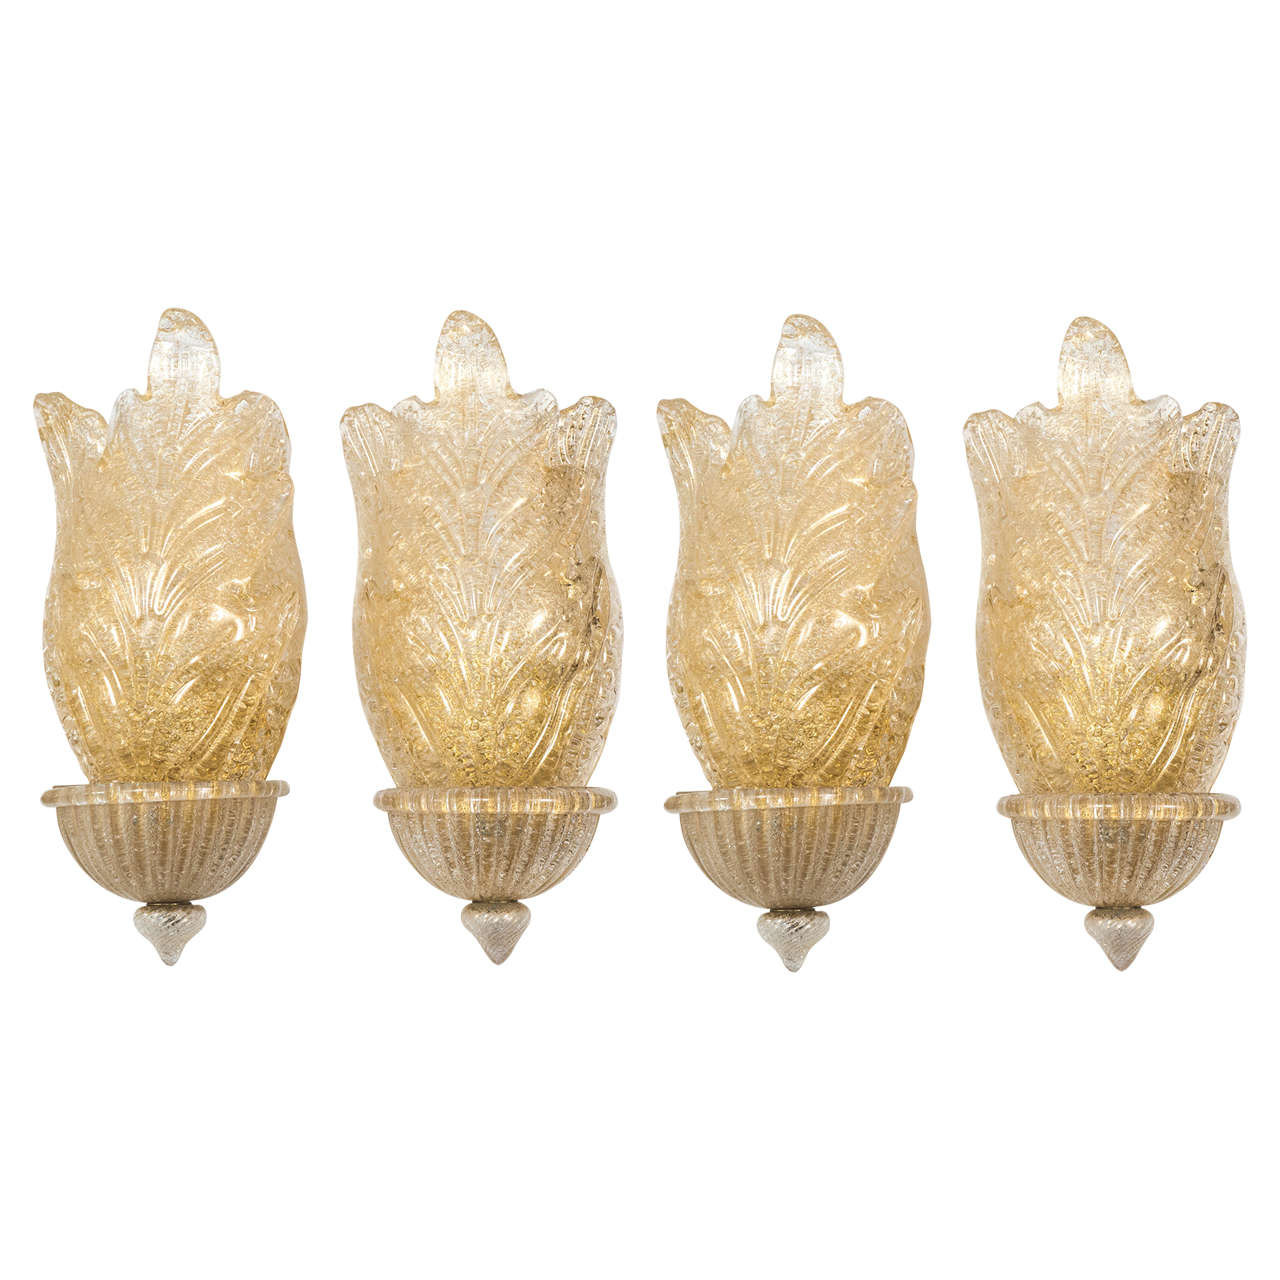 Pair of Clustered Murano Glass Leaf Sconces